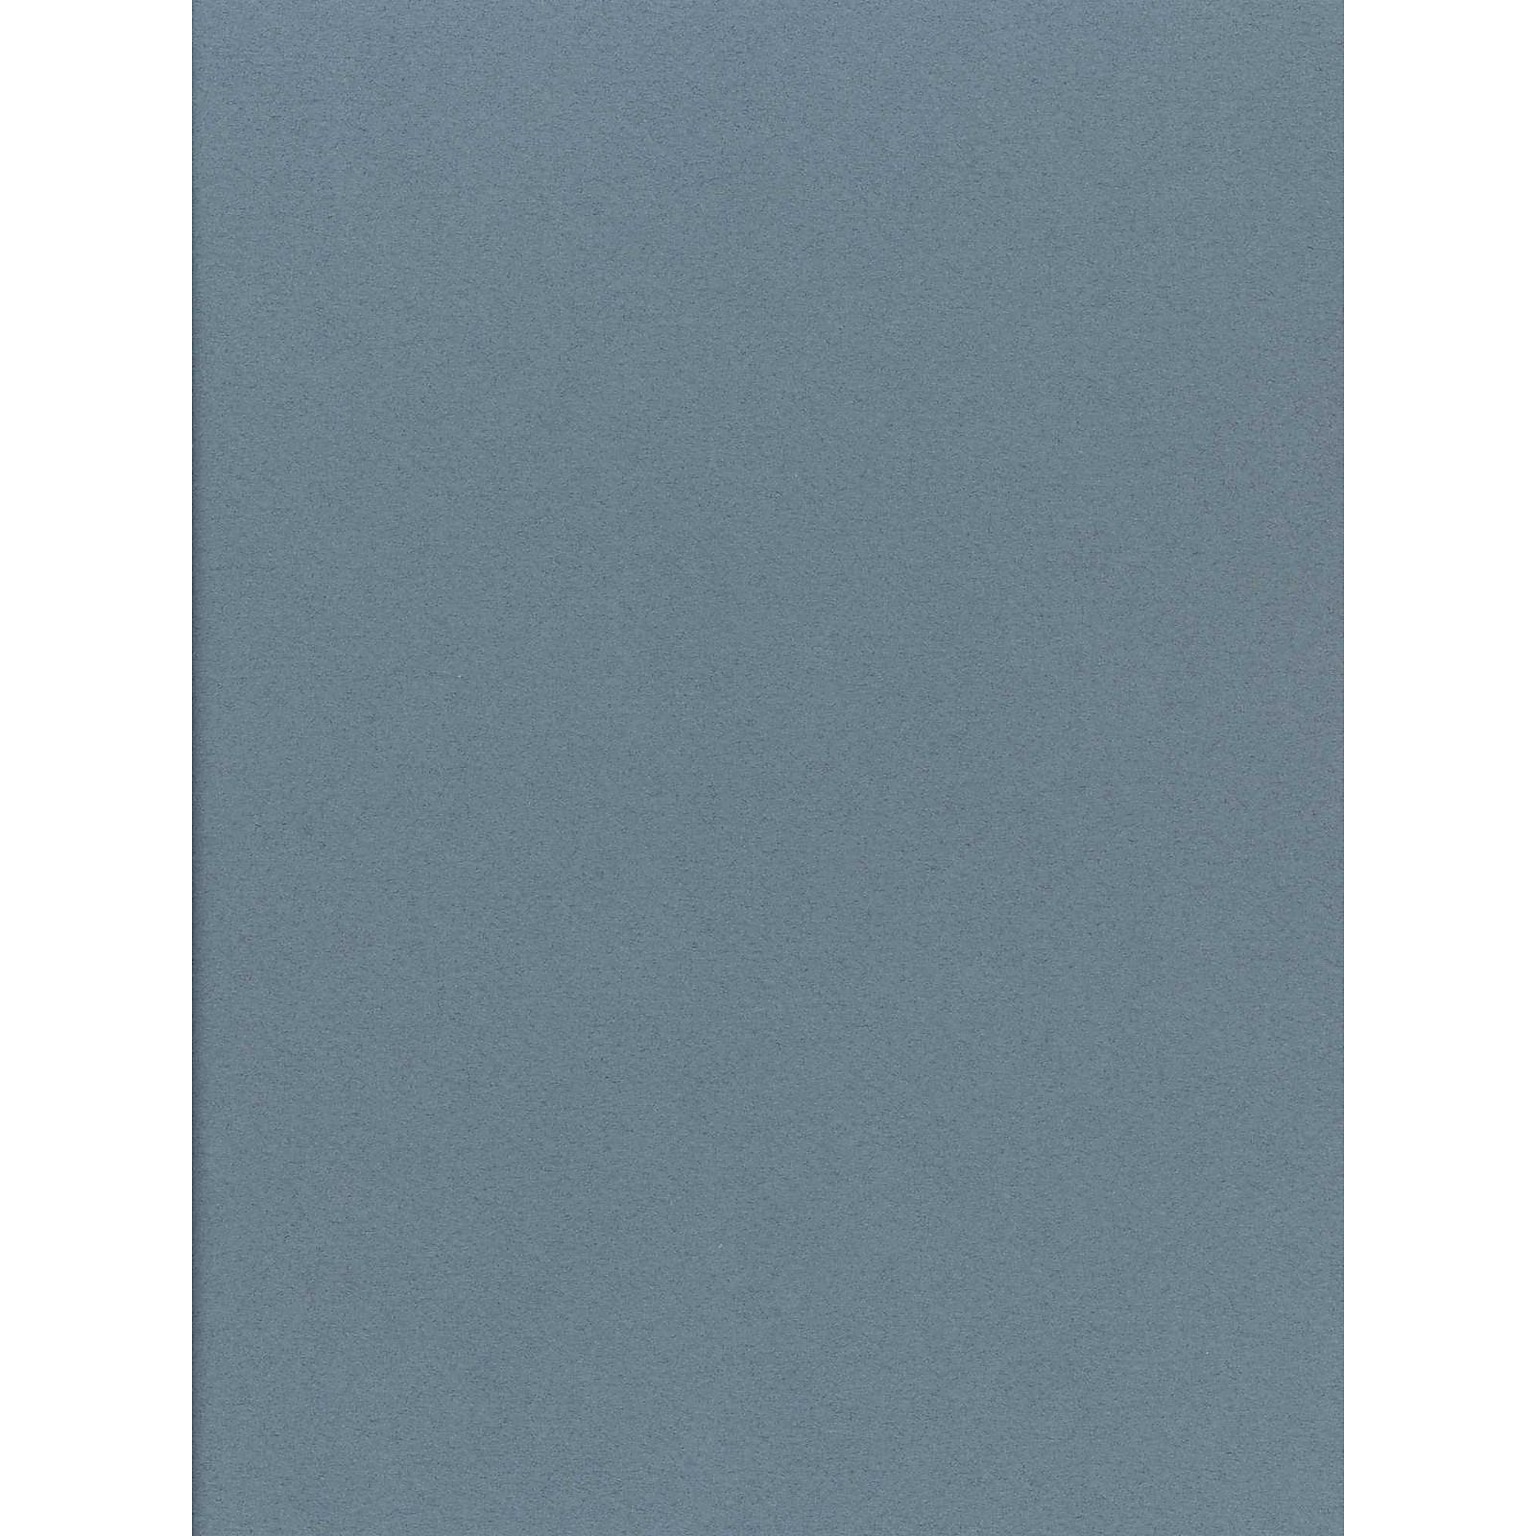 Canson Mi-Teintes Mat Board Light Blue 16 In. X 20 In. [Pack Of 5] (5PK-100510147)